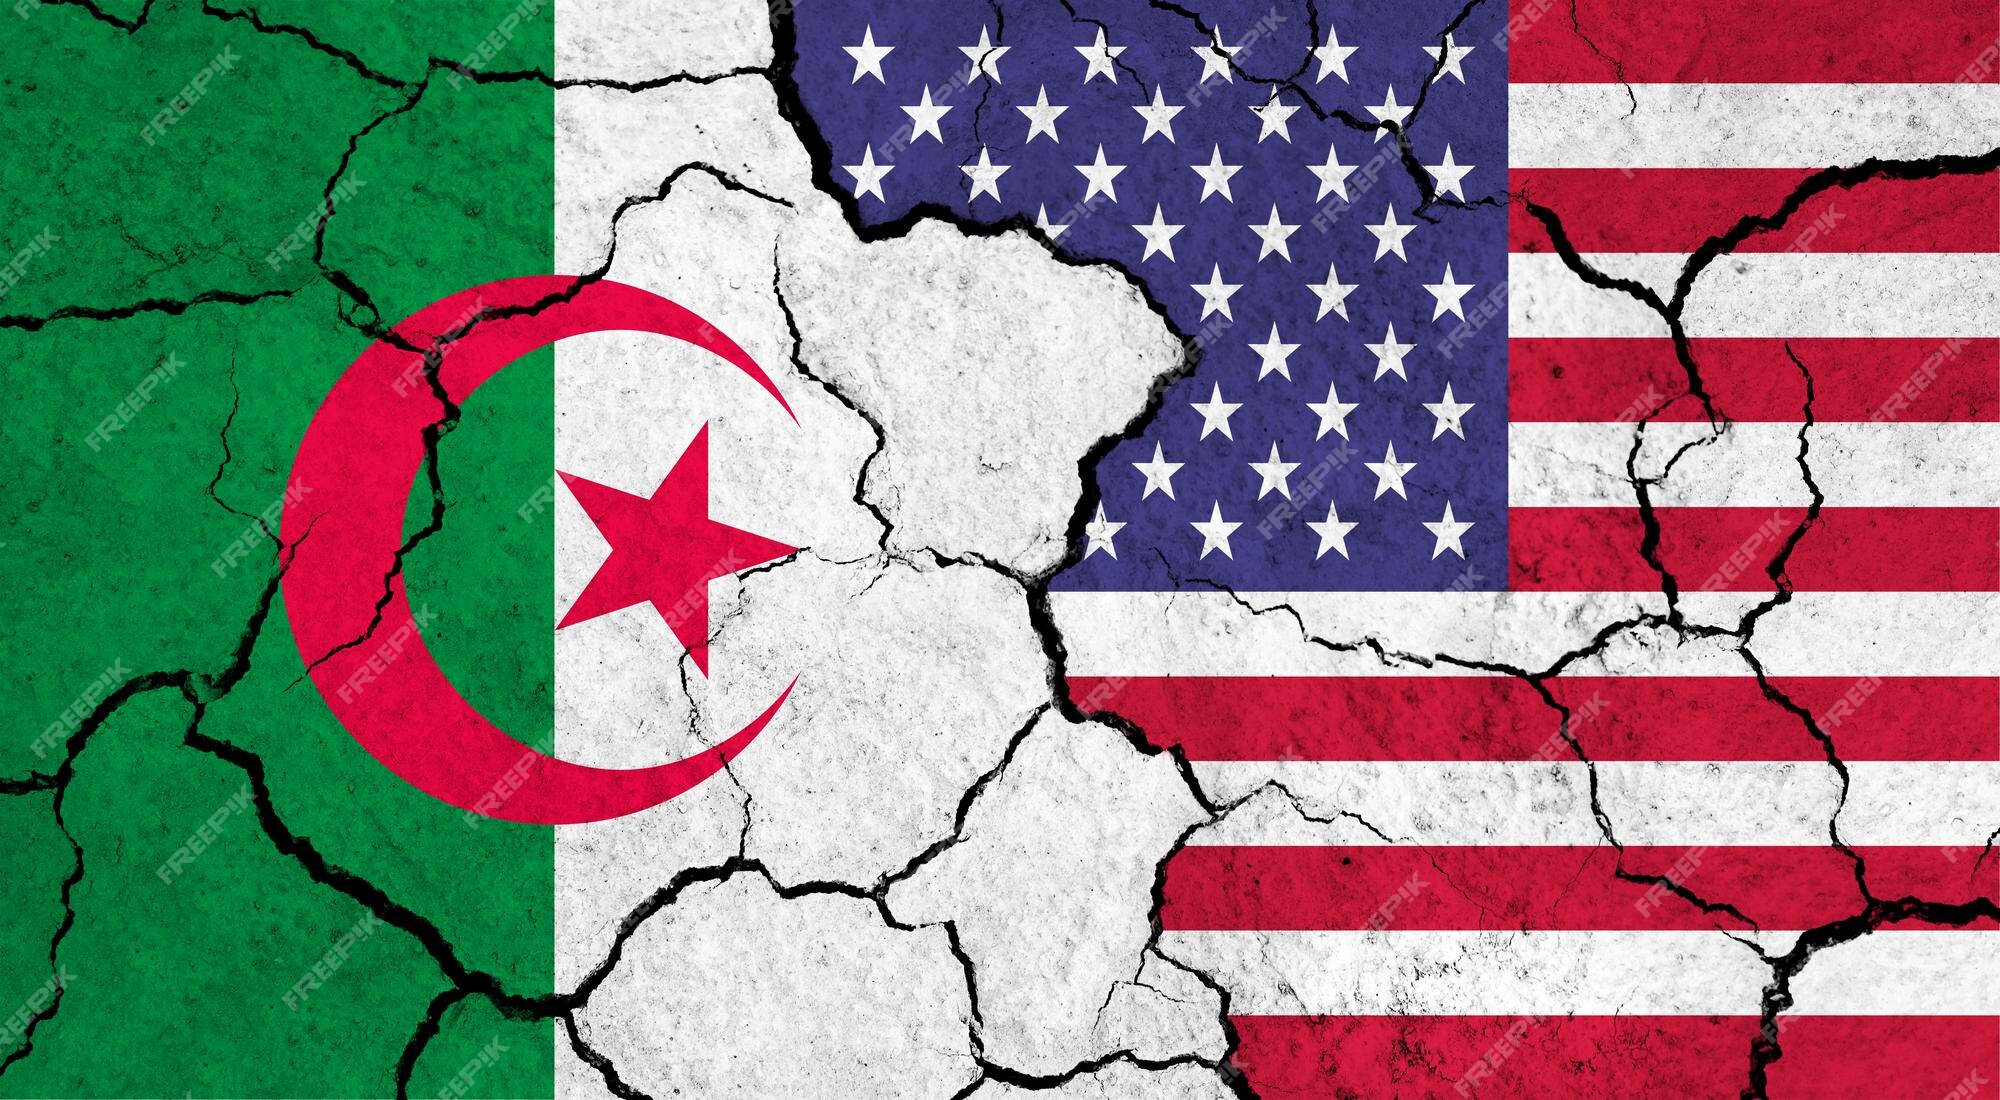 U.S.A.-Algeria: Political tension leads Algiers to deny airspace to U.S. military plane